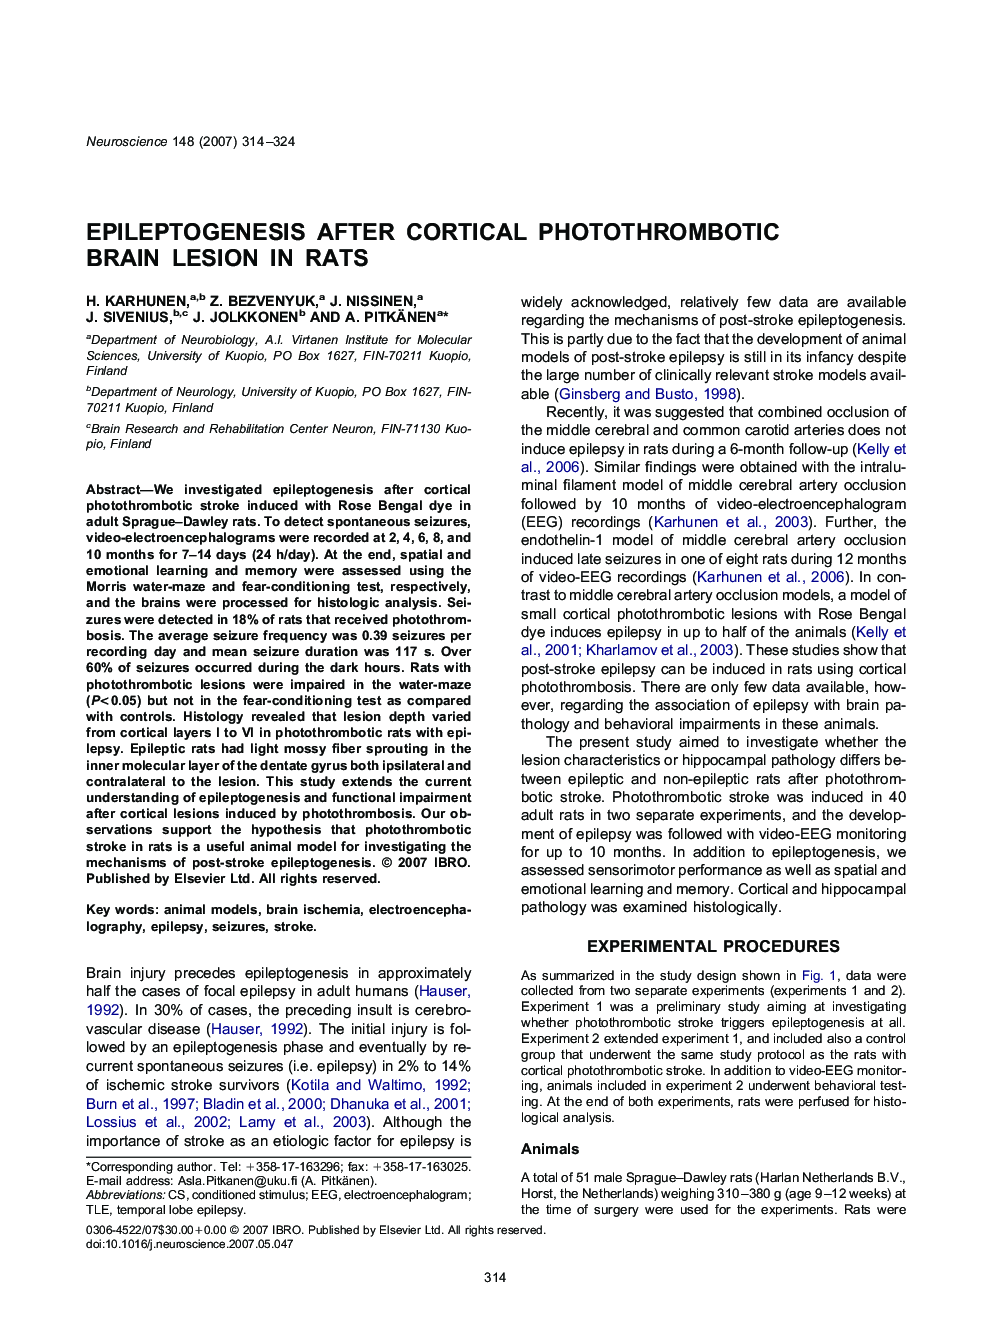 Epileptogenesis after cortical photothrombotic brain lesion in rats